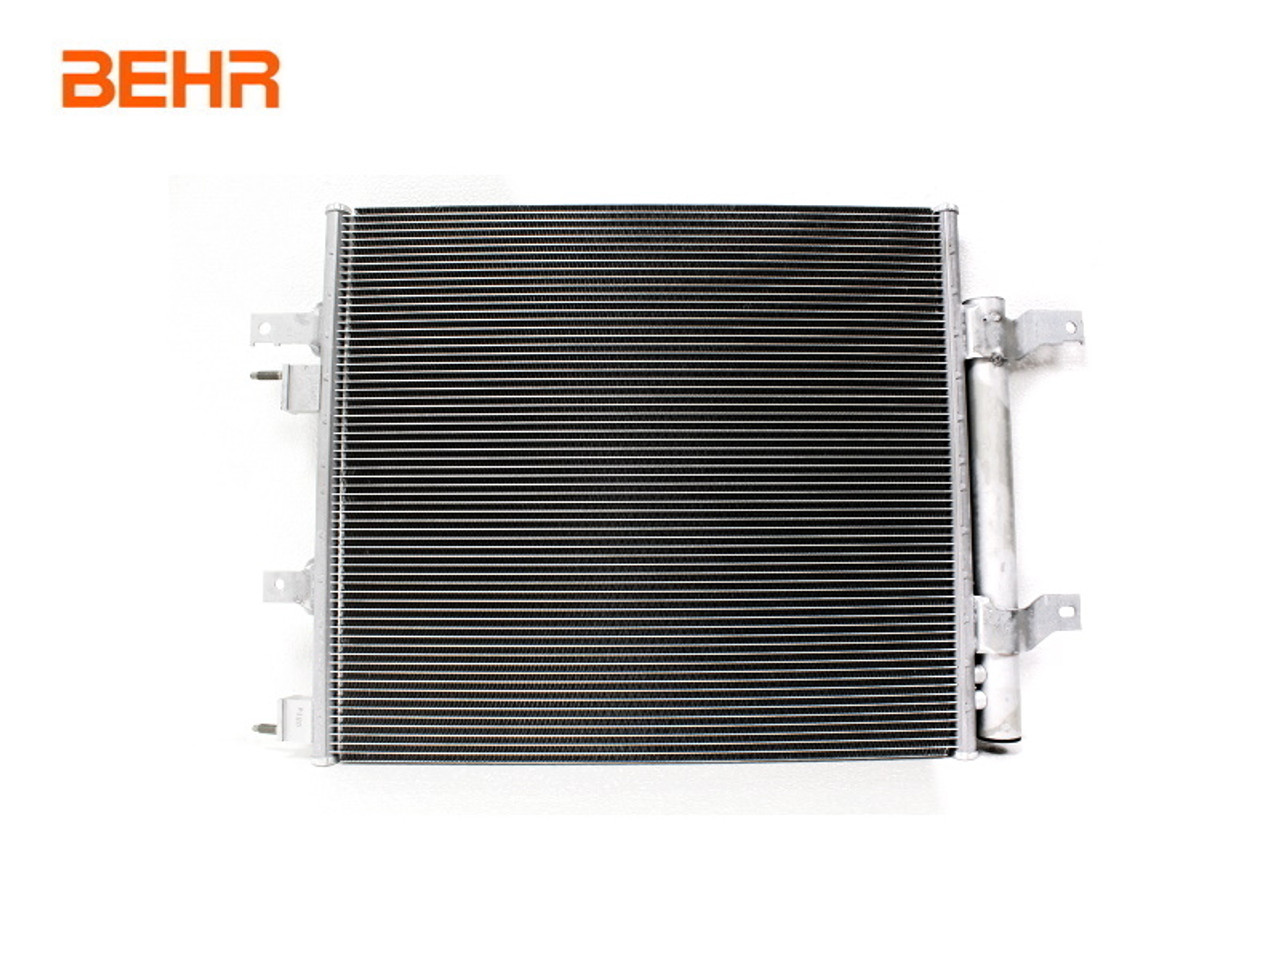 Jaguar F Type, XJ and XF Behr Air Condition Condenser - C2D26543